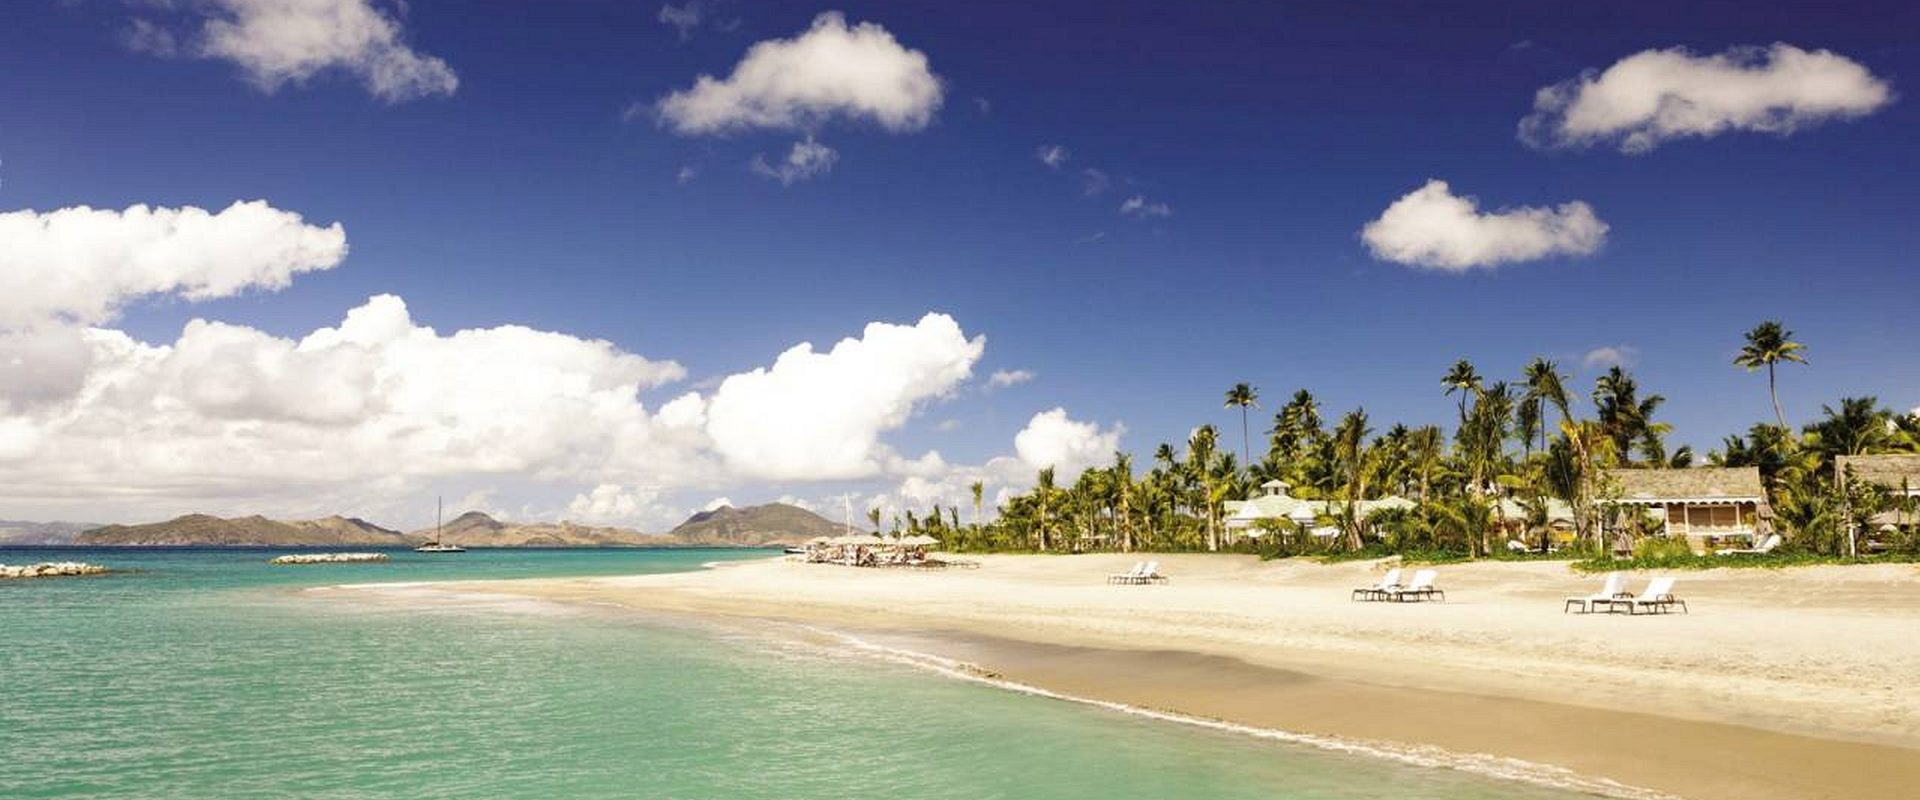 St.Kitts and Nevis